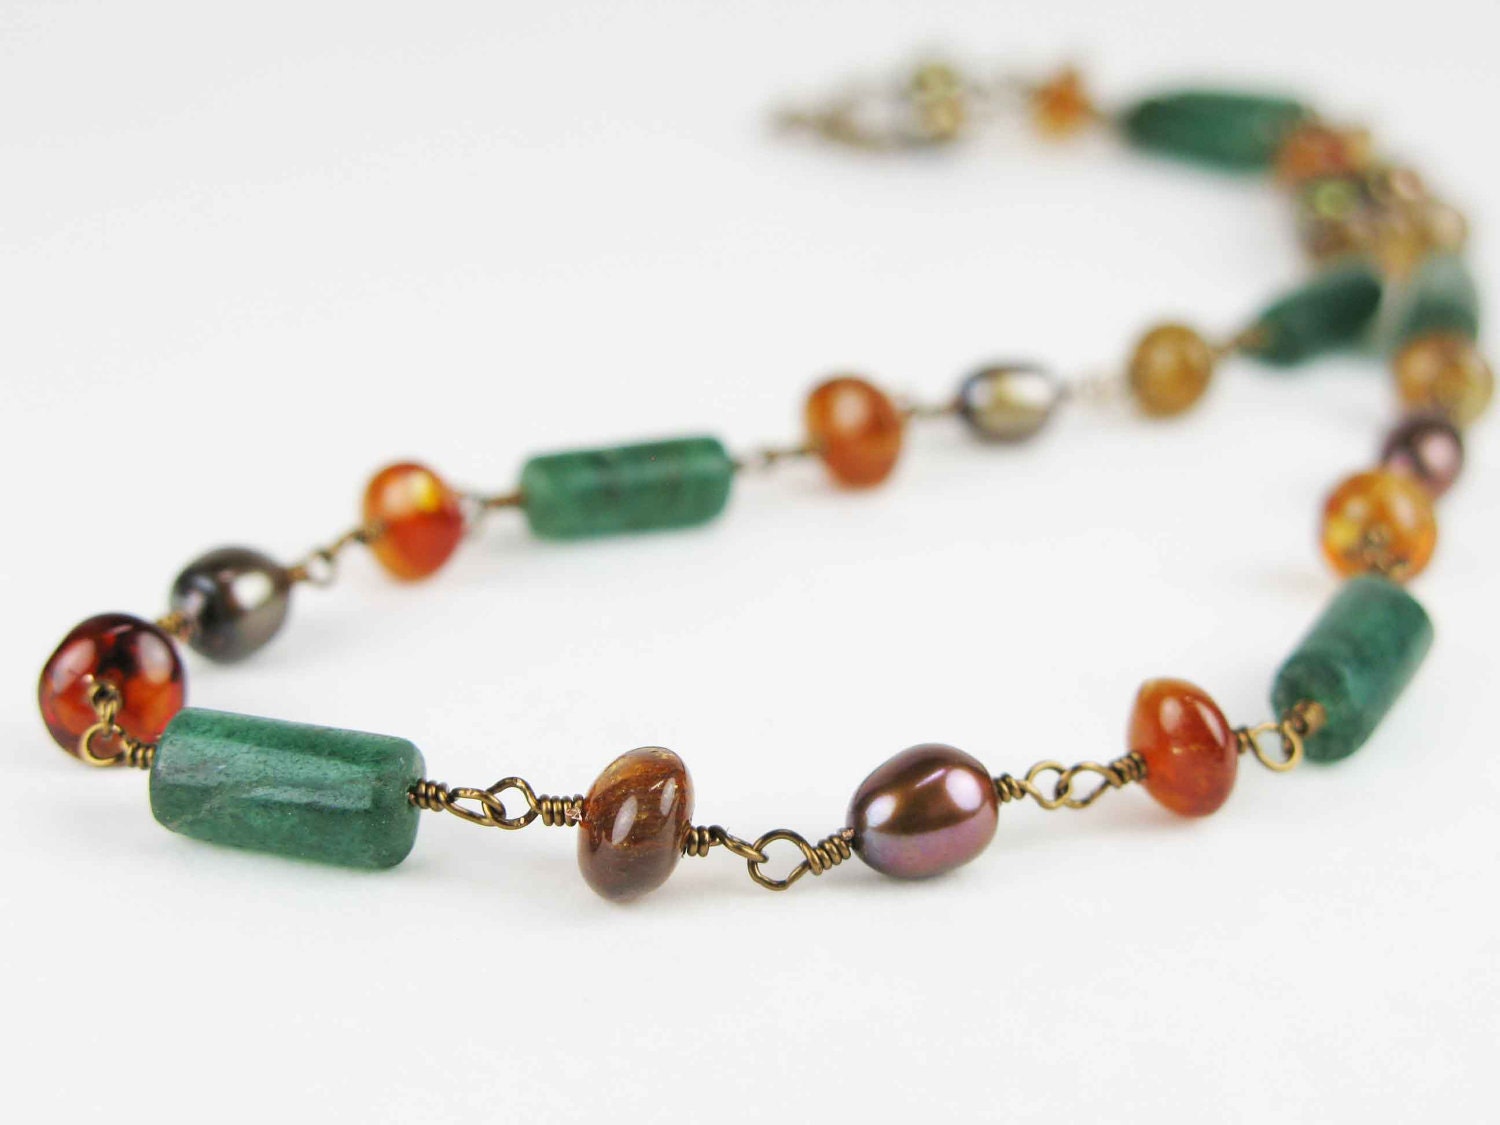 HERMINIA: Reproduction Roman Necklace - "vintage bronze" wirework with emerald green aventurine, citrine and pearls - Handmade - mejjewelry